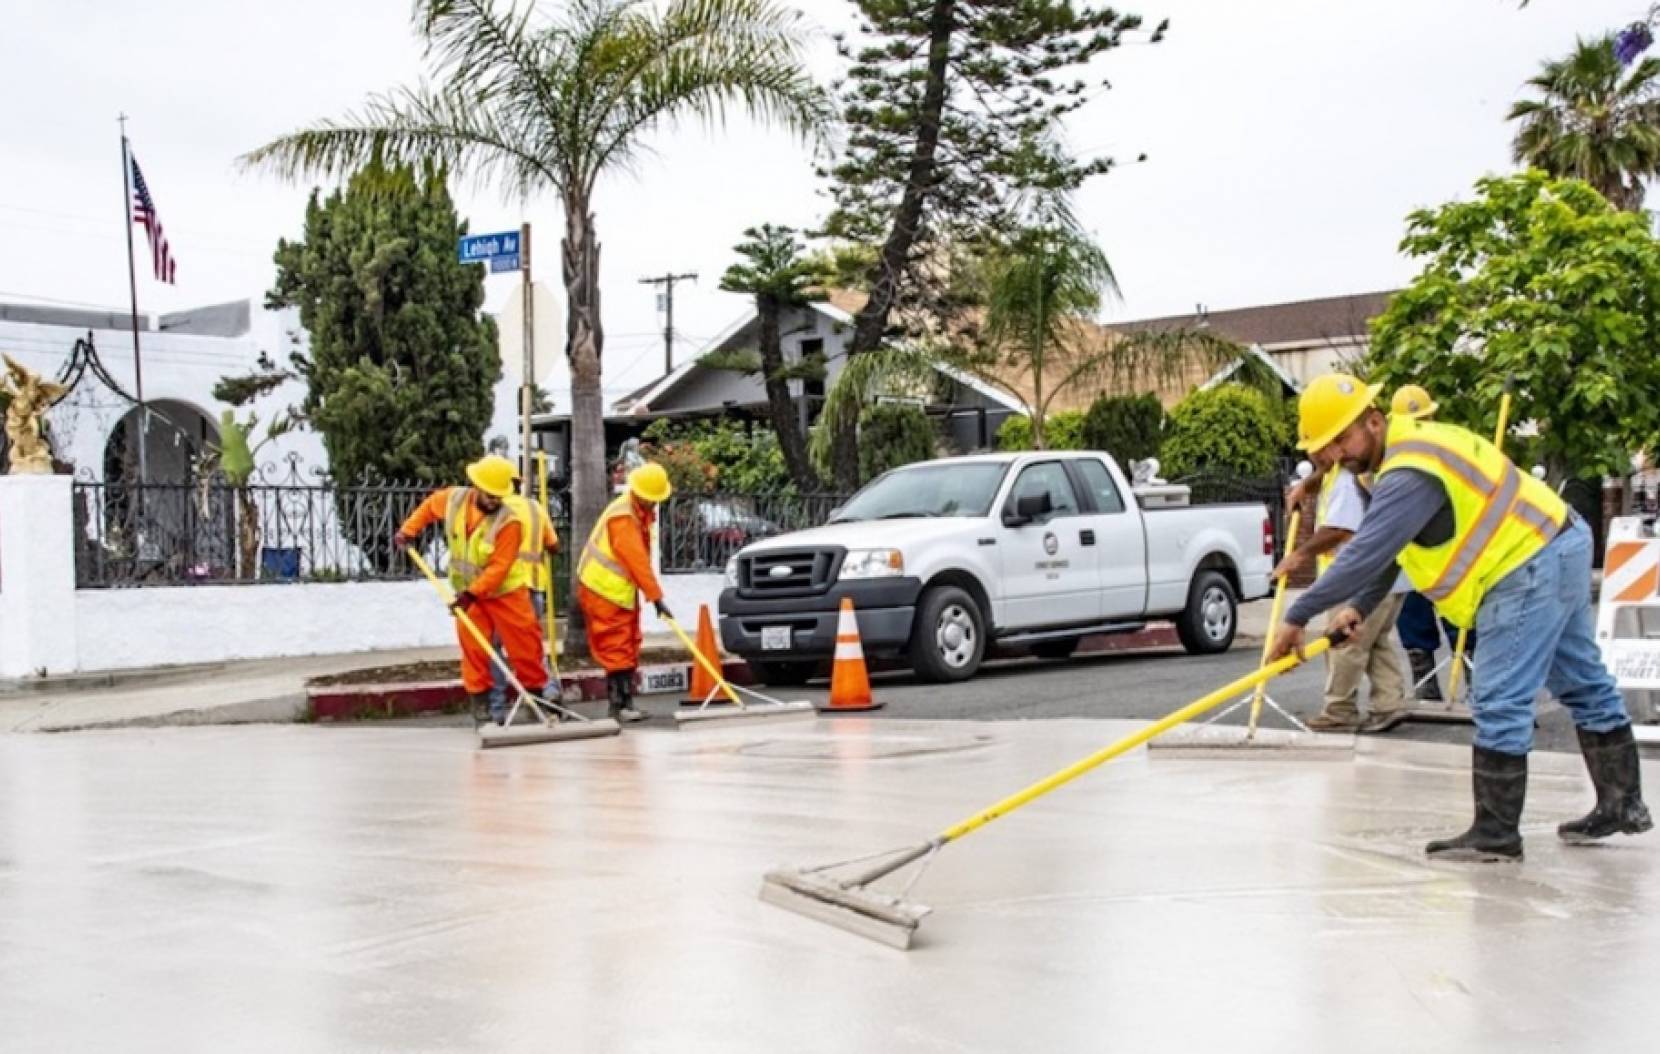 Workers applying cool pavement technology to a street in Pacoima